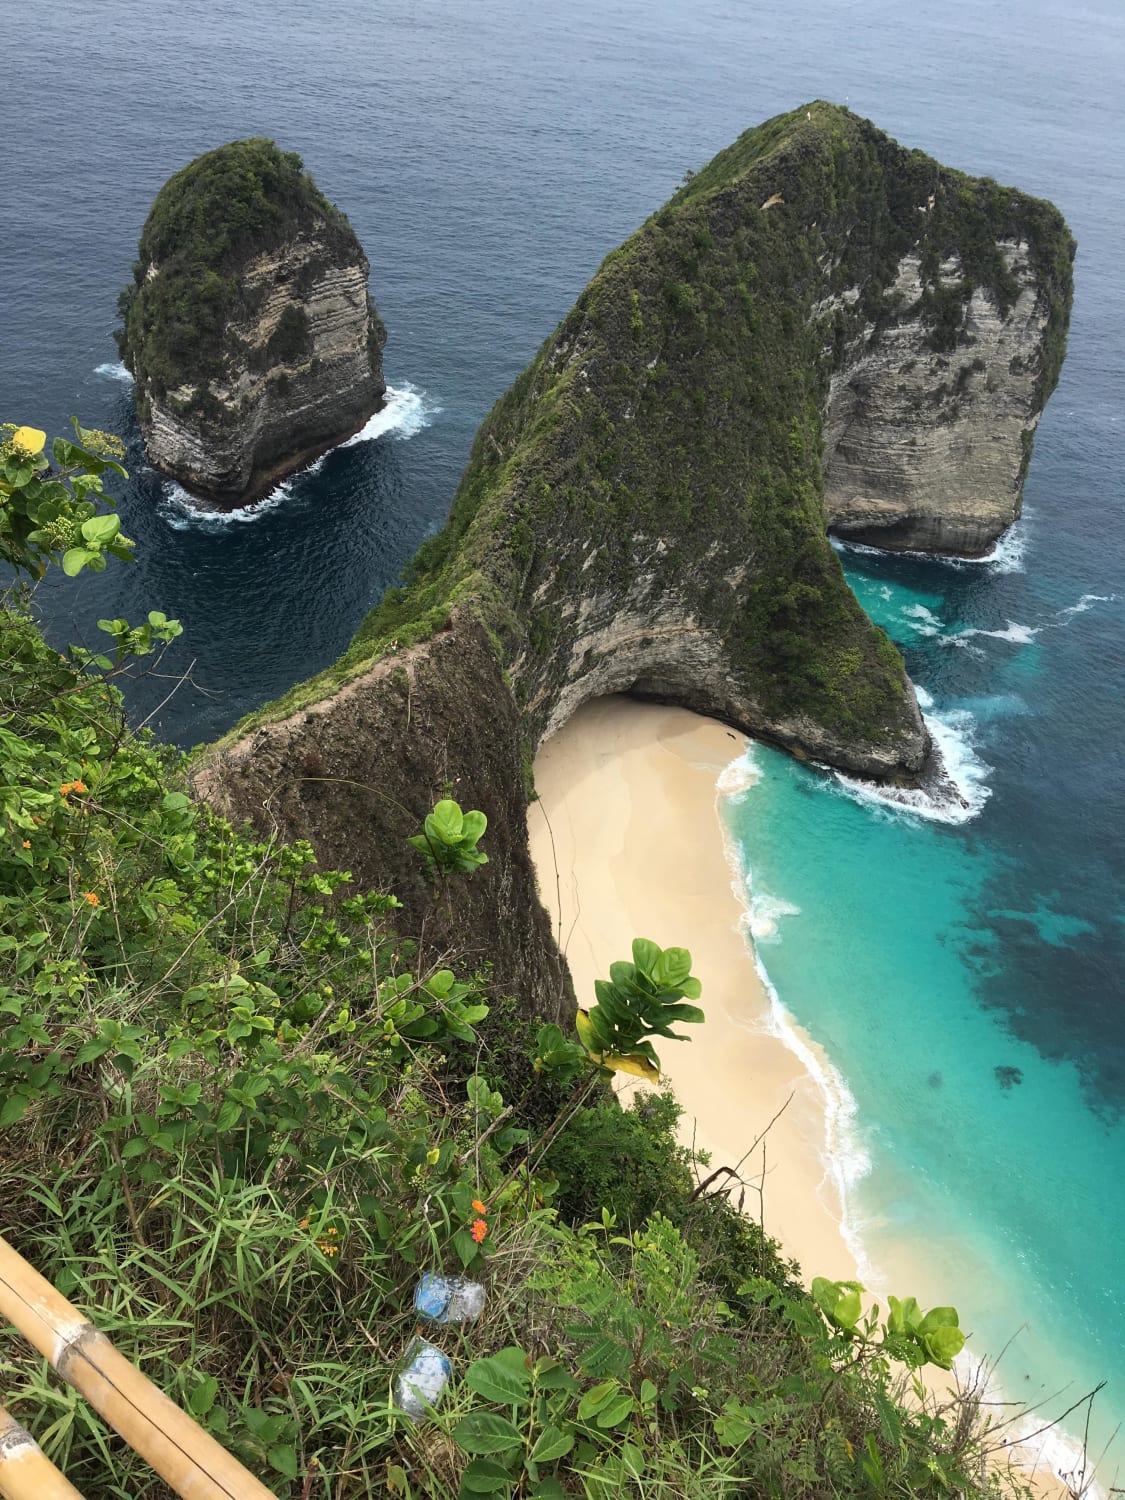 About to hike down to the beach. Nusa Penida, Bali.